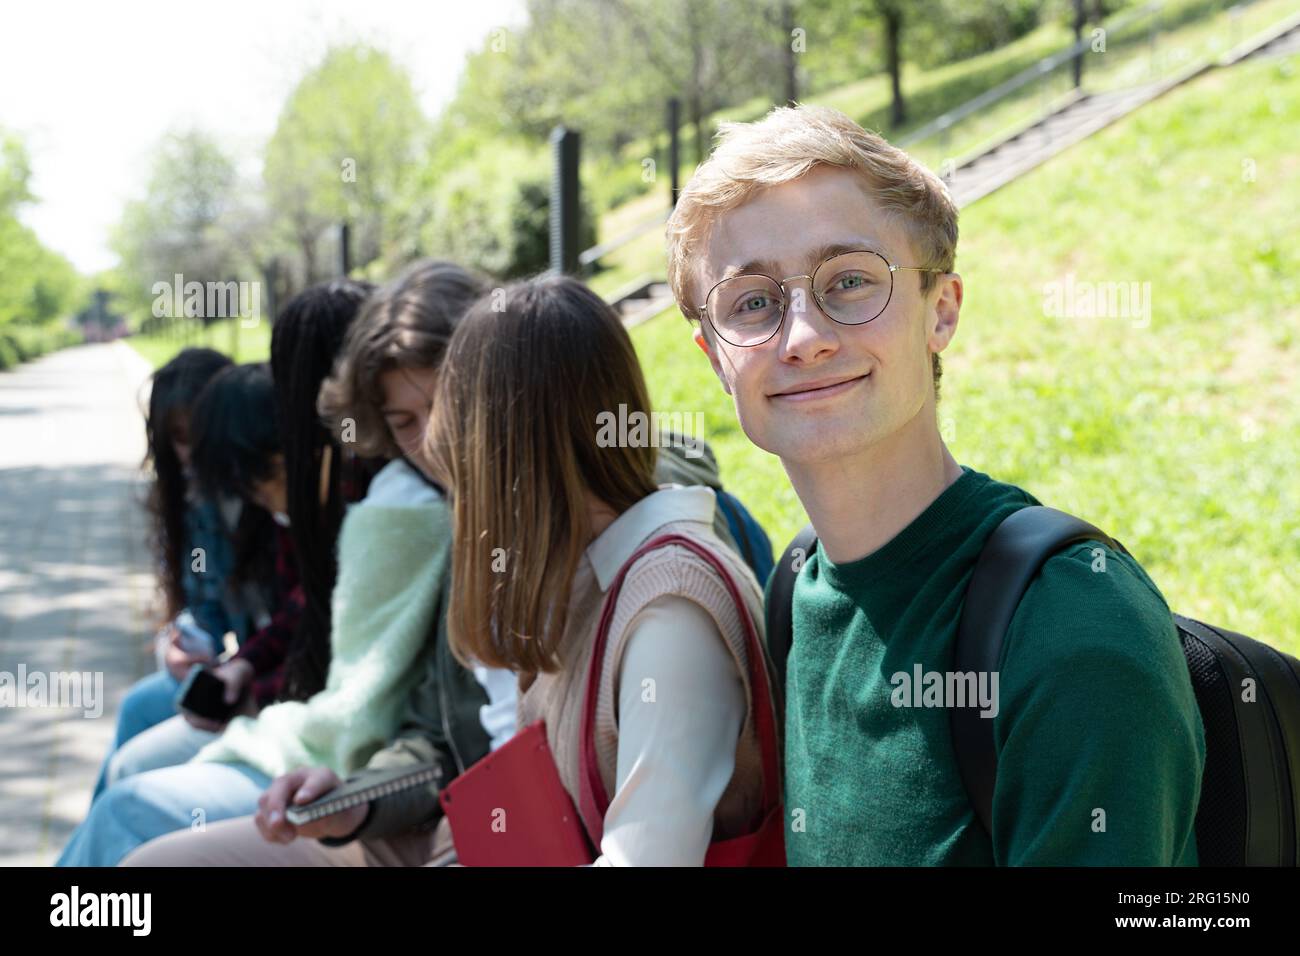 A group of multiracial teen students sits in a park. While friends interact with each other, a British boy with glasses, blond hair, and freckles smil Stock Photo